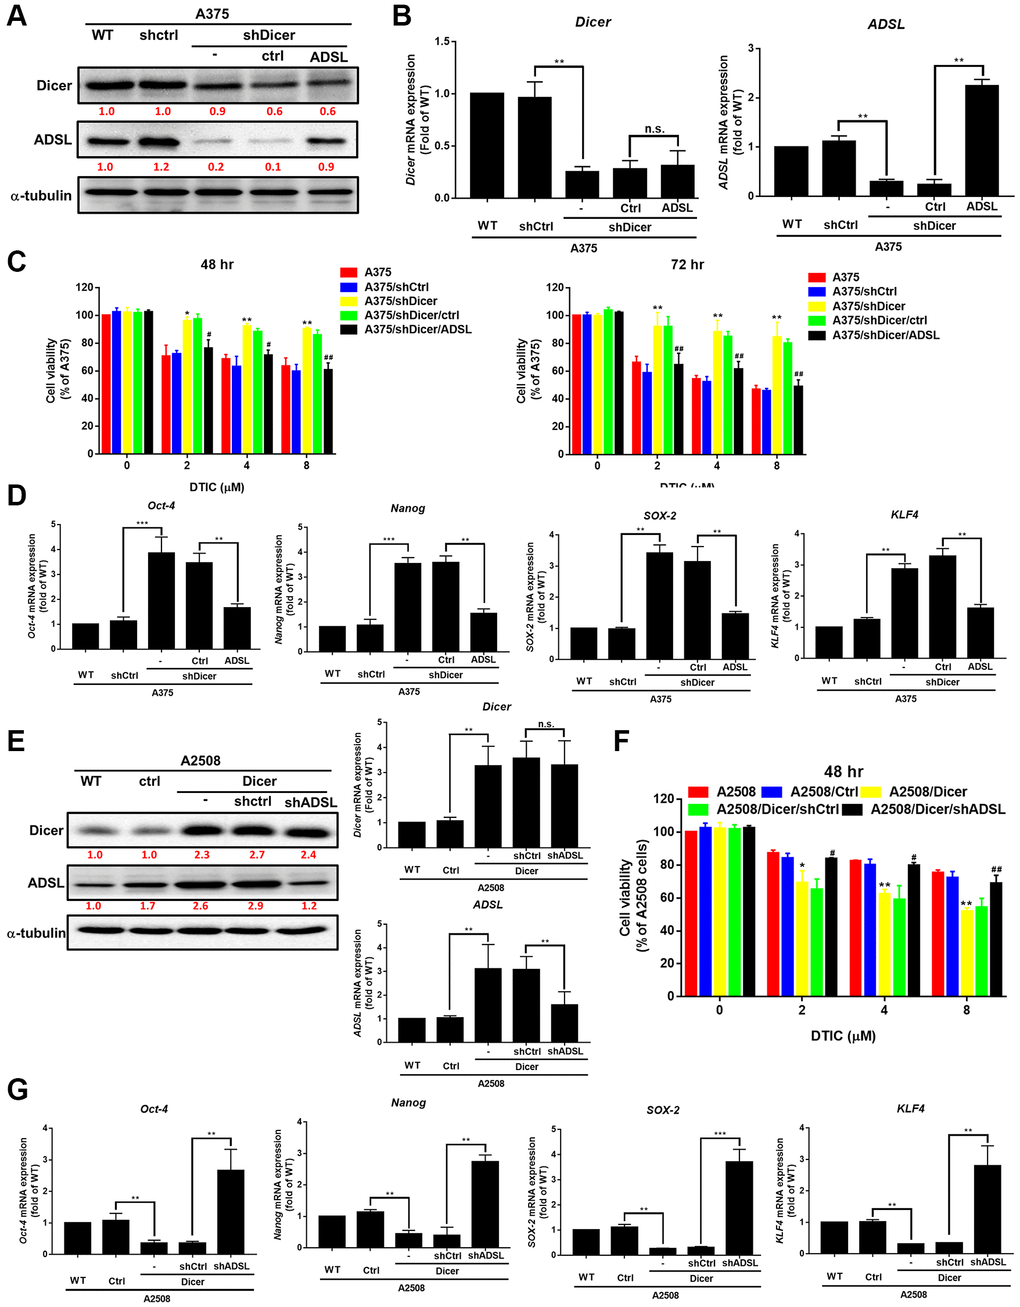 Role of ADSL signaling in Dicer-mediated DTIC resistance and stemness in melanoma cells. (A) Western blotting results and (B) qRT-PCR results indicating the levels of Dicer and ADSL in Dicer-silenced A375 cells transfected with ADSL overexpression plasmids. (C) Cell viability (assessed through the MTT assay) 48 and 72 h after treatment with DTIC. (D) Expression levels of Oct-4, Nanog, SOX2, and KLF4 mRNA (measured through QRT-PCR). (E) Western blotting and qRT-PCR results indicating the levels of Dicer and ADSL in Dicer-overexpressing A2508 cells transfected with ADSL-silenced plasmids. (F, G) Cell viability (assessed through the MTT assay) and the expression levels of various cancer stem cell markers (measured through qRT-PCR) upon treatment with varying concentrations of DTIC: Oct-4, Nanog, SOX2, and KLF4. Data are presented in terms of the mean ± standard error of the mean of three independent experiments, each performed in triplicate. **P ***P t test).